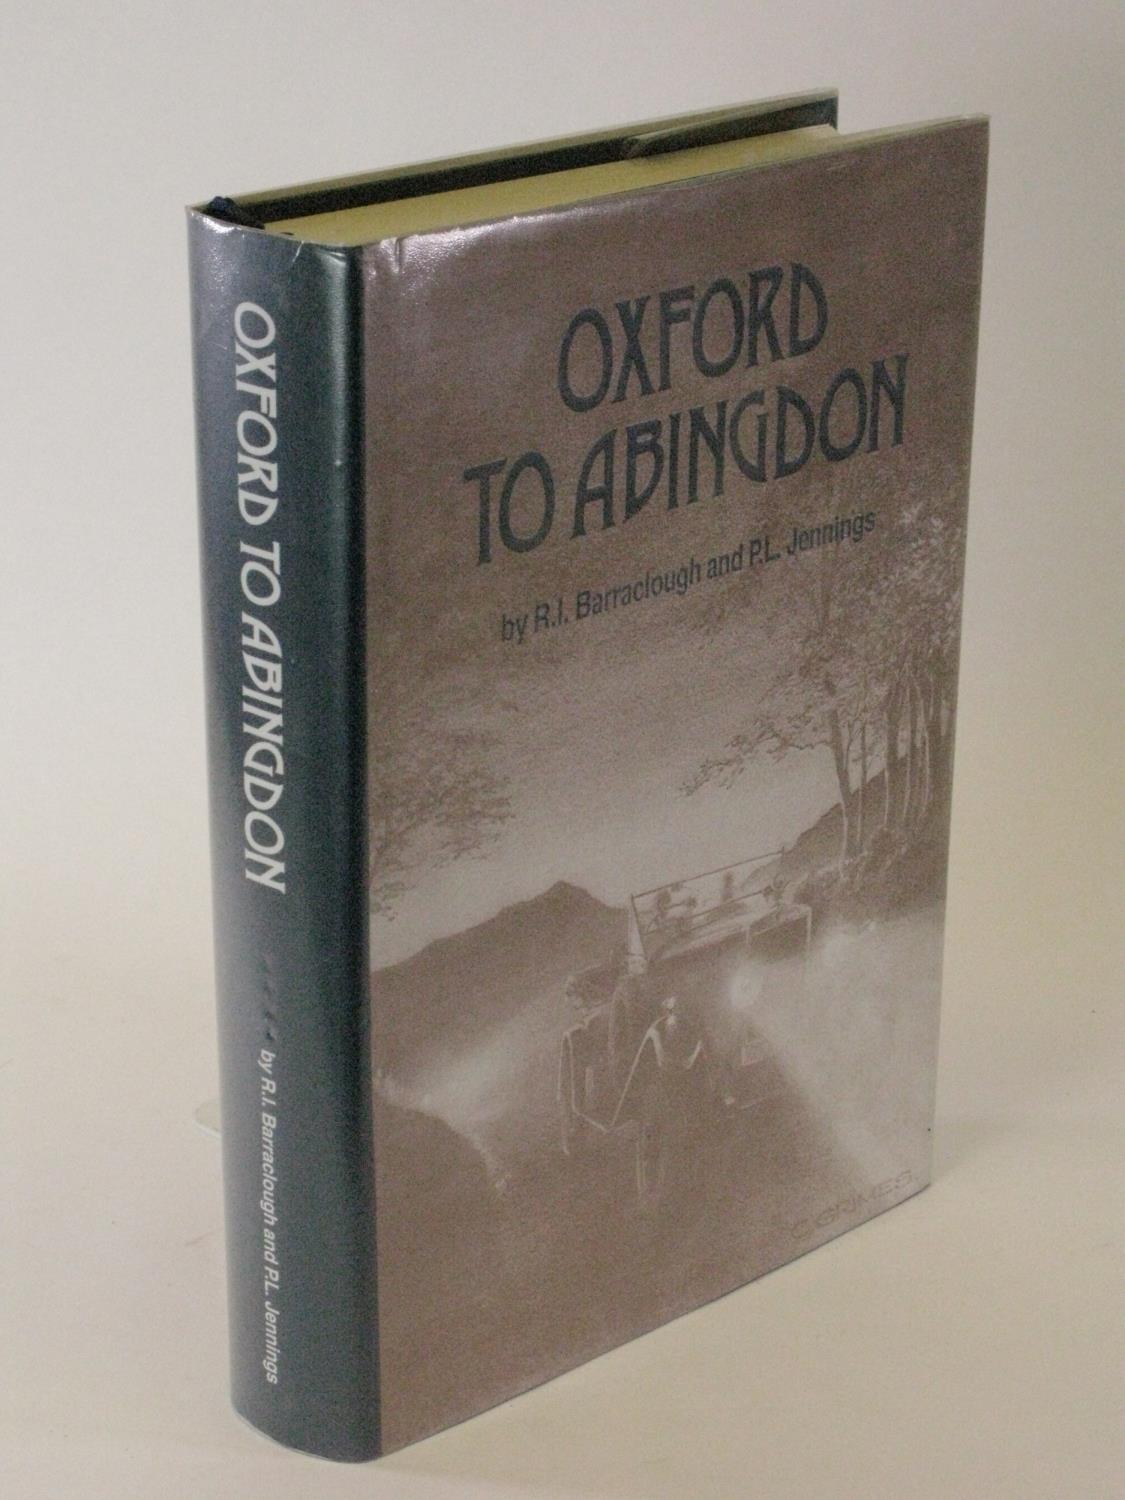 Oxford to Abingdon by R. Barraclough & P. Jennings, 1997, 873pp including index, a detailed review